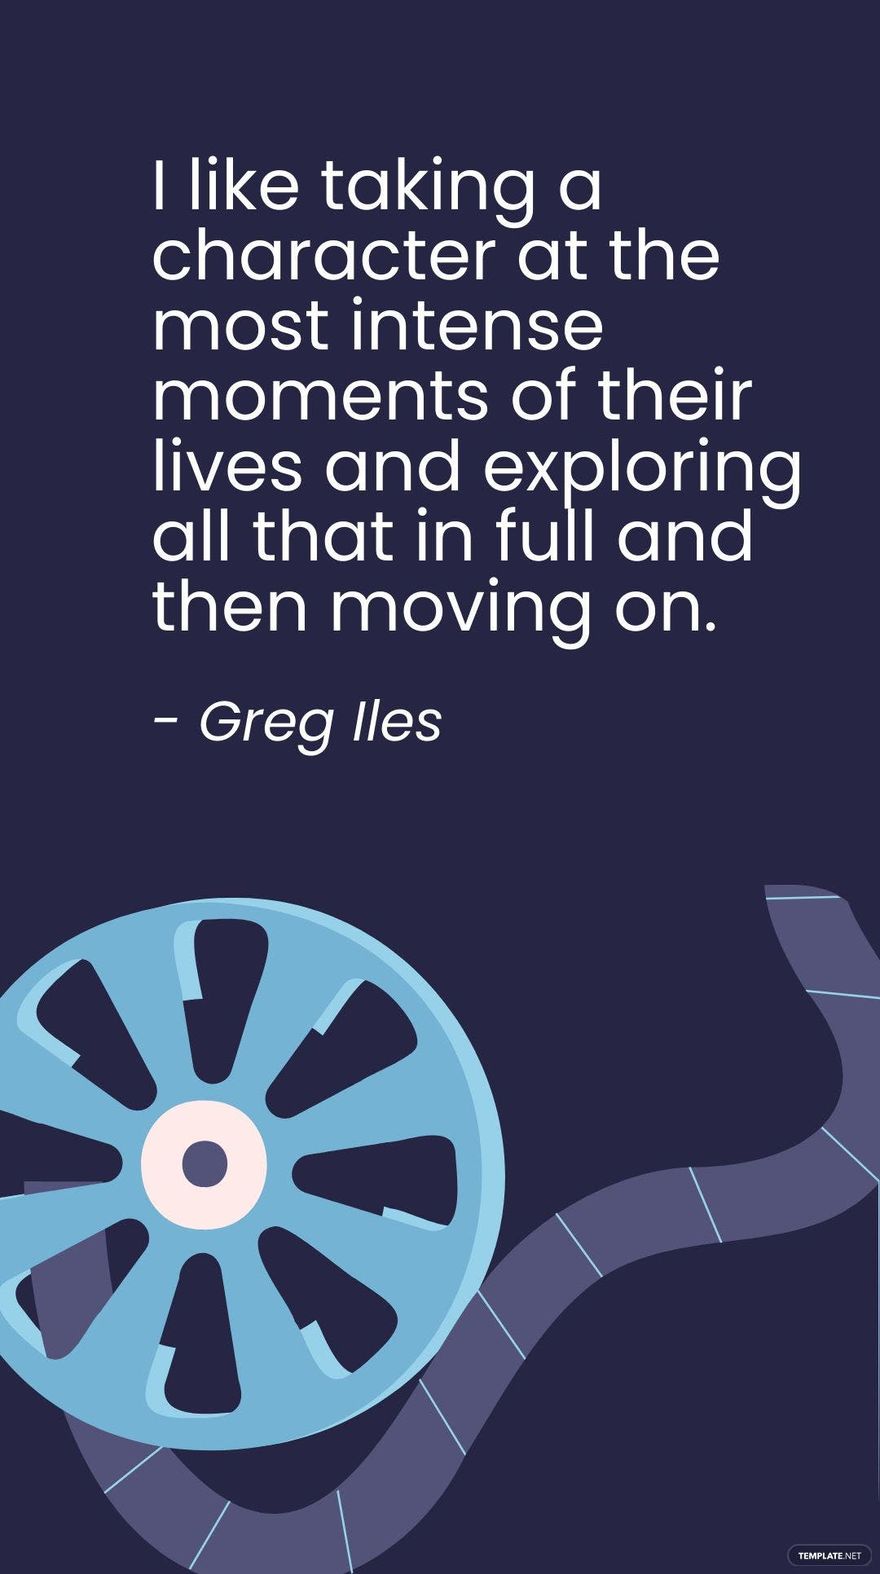 Free Greg Iles - I like taking a character at the most intense moments of their lives and exploring all that in full and then moving on. in JPG